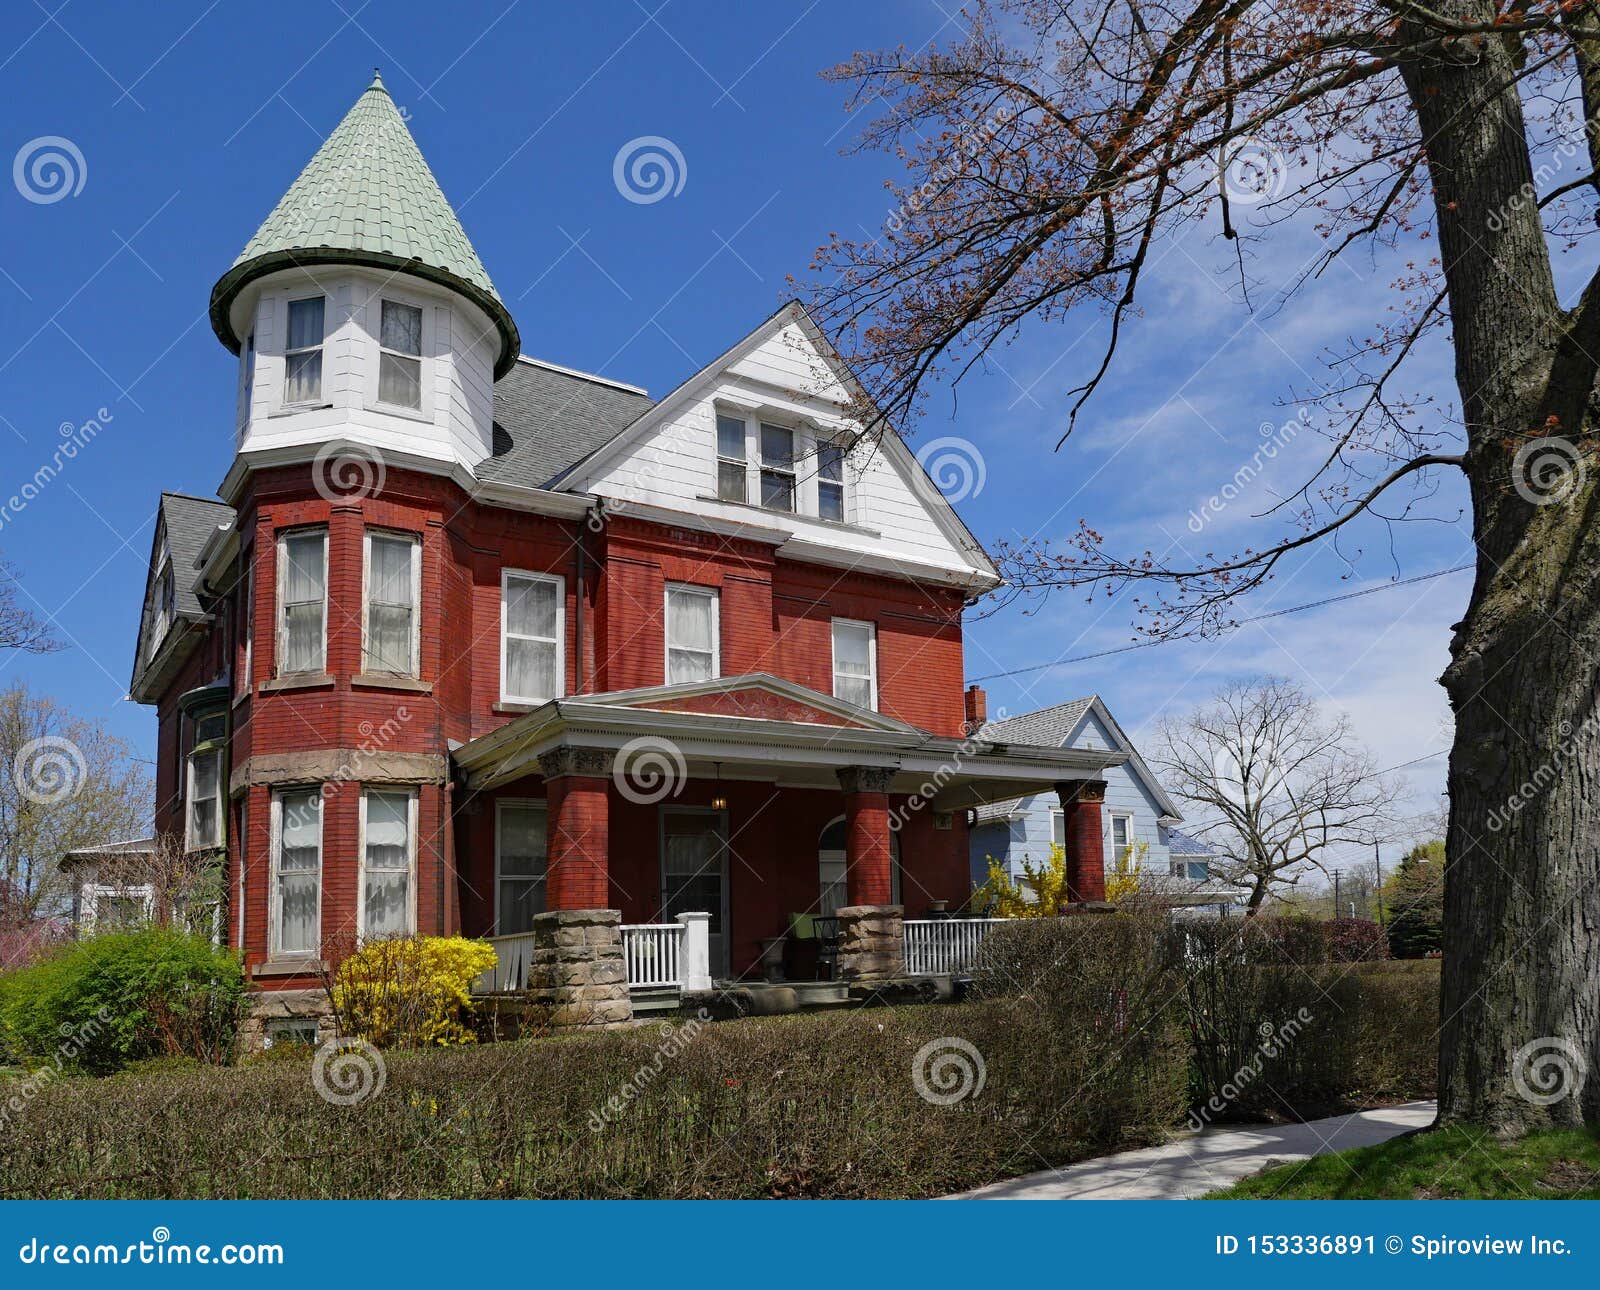 Large Old Brick House With Turret Room Stock Image Image 